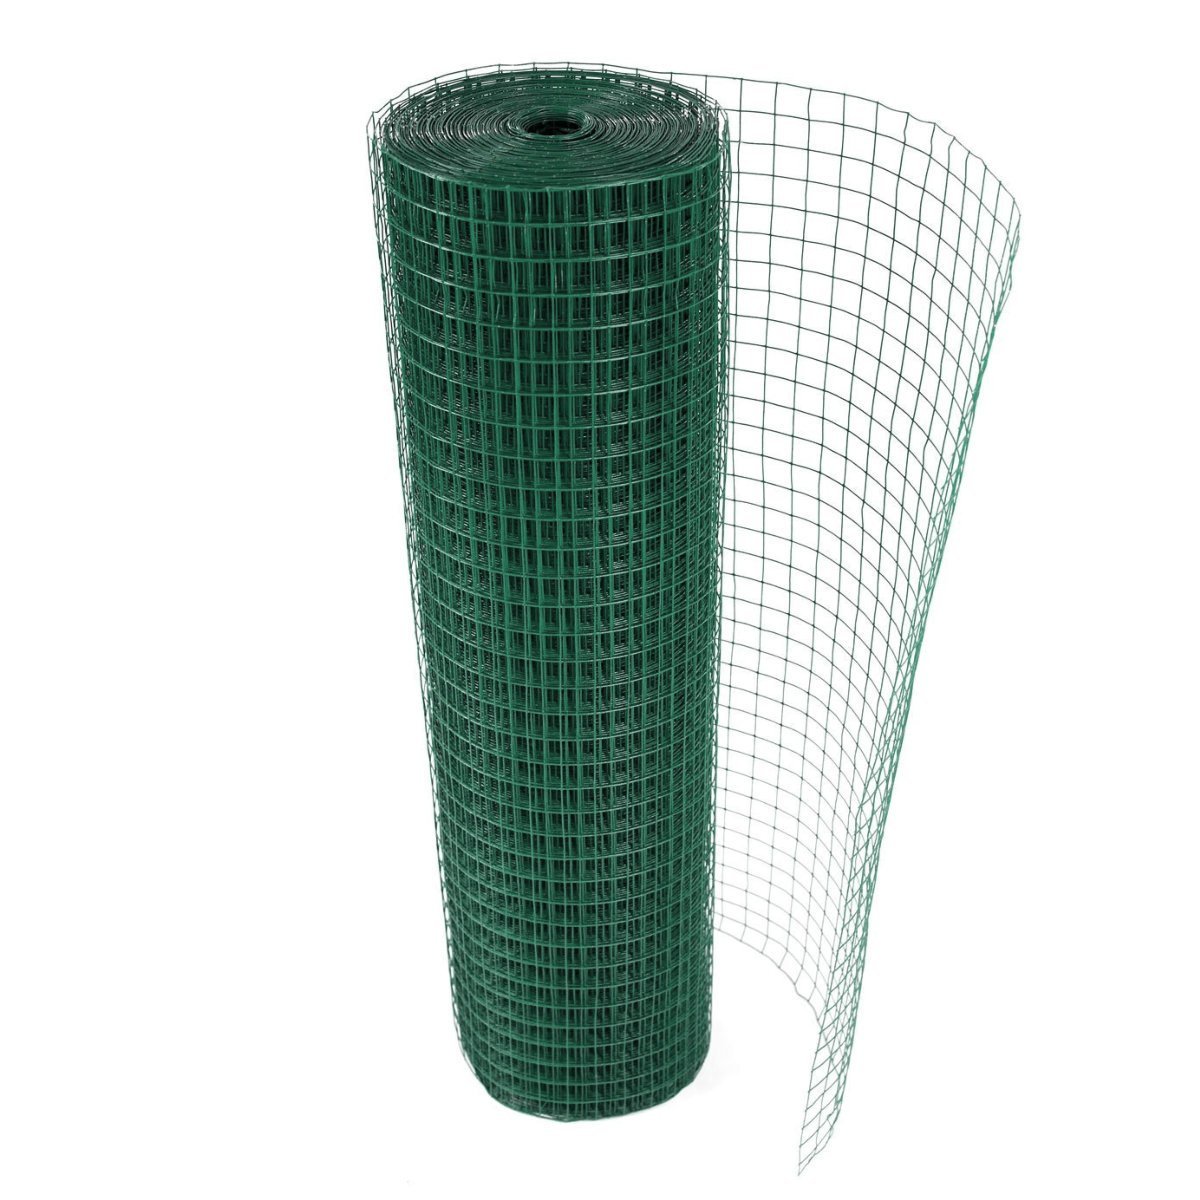 You do not understand the classification of welded wire mesh